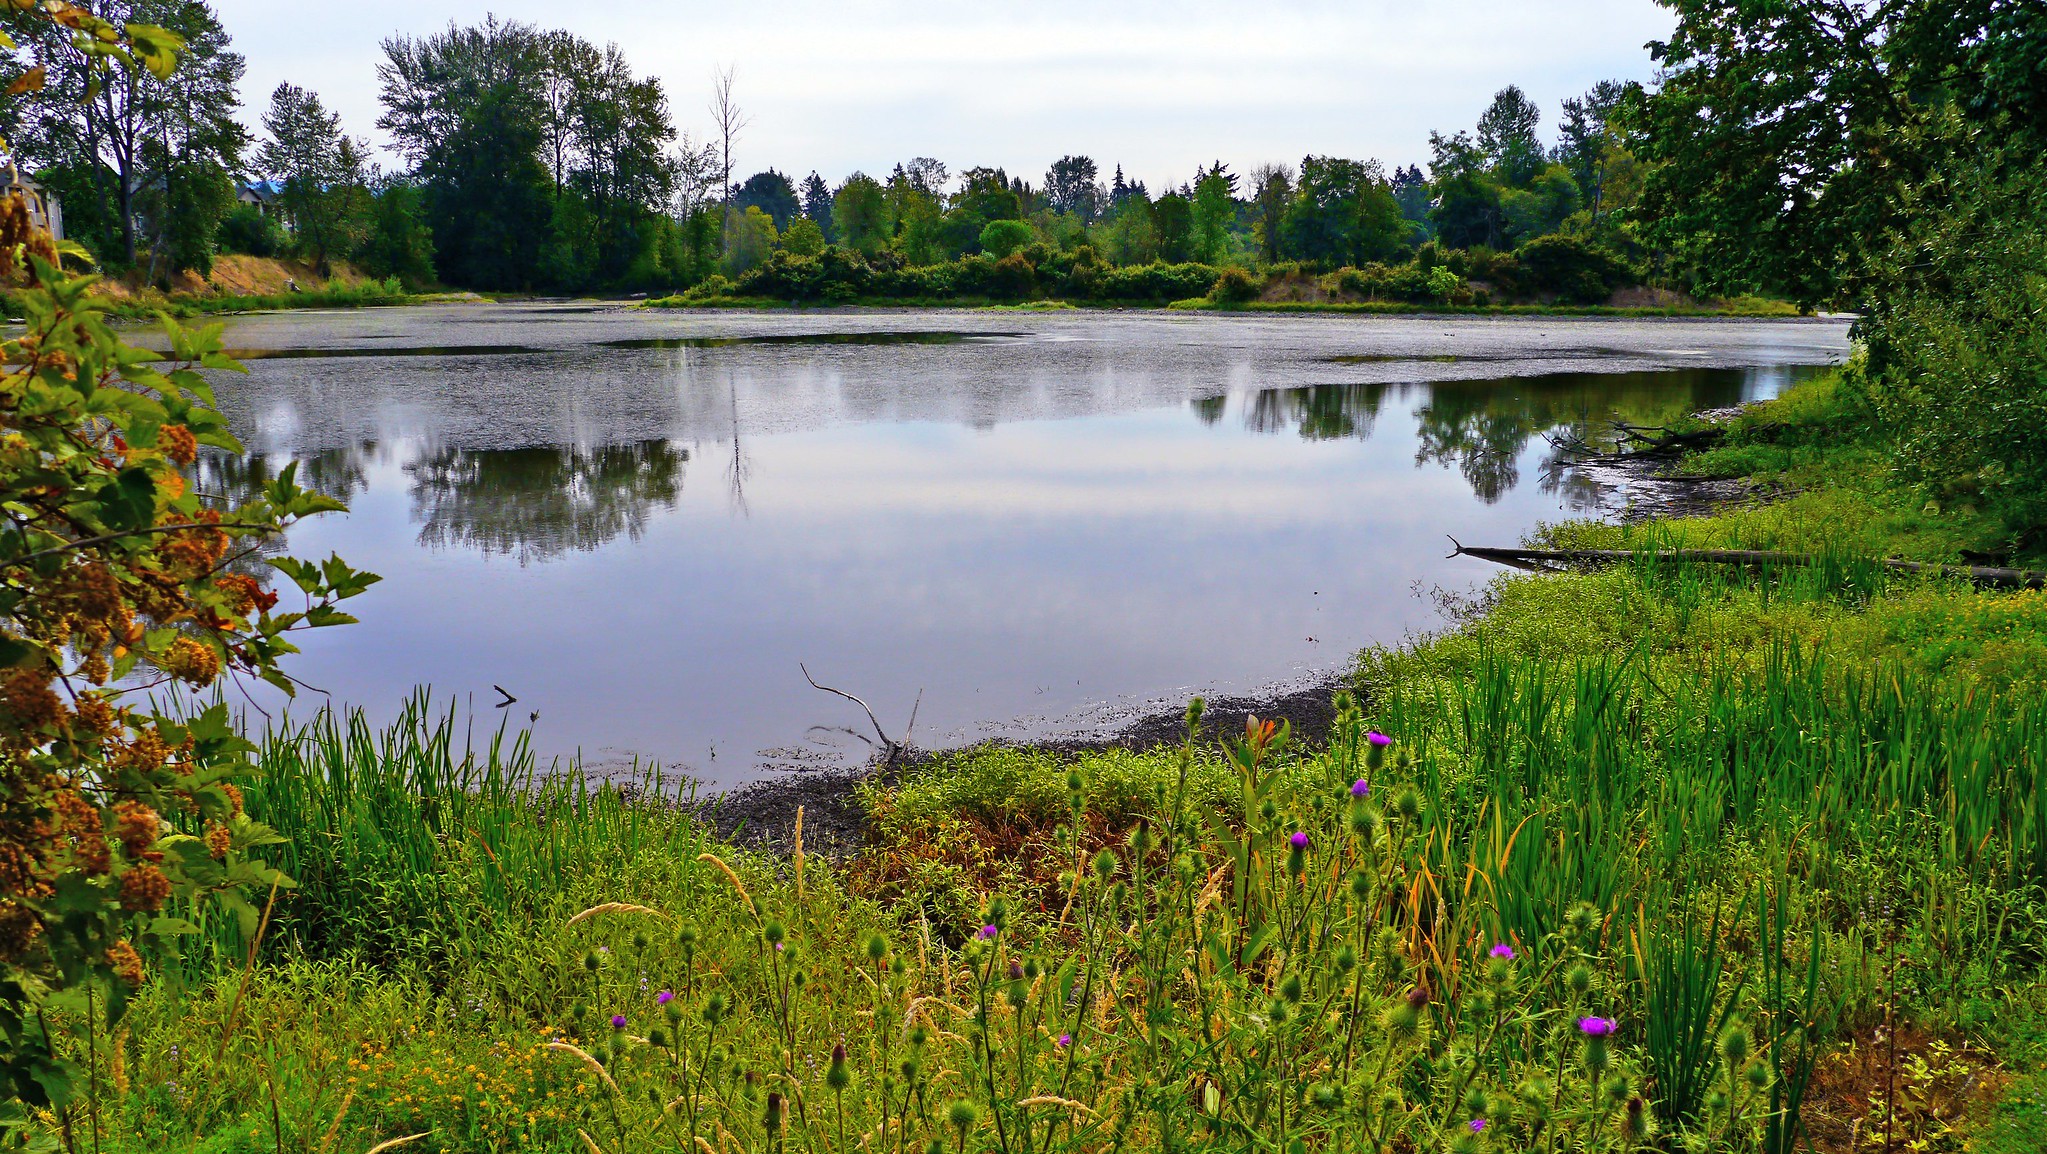 Delta Pond in Eugene, Oregon surrounded by trees, plants and flowers on the shoreline.